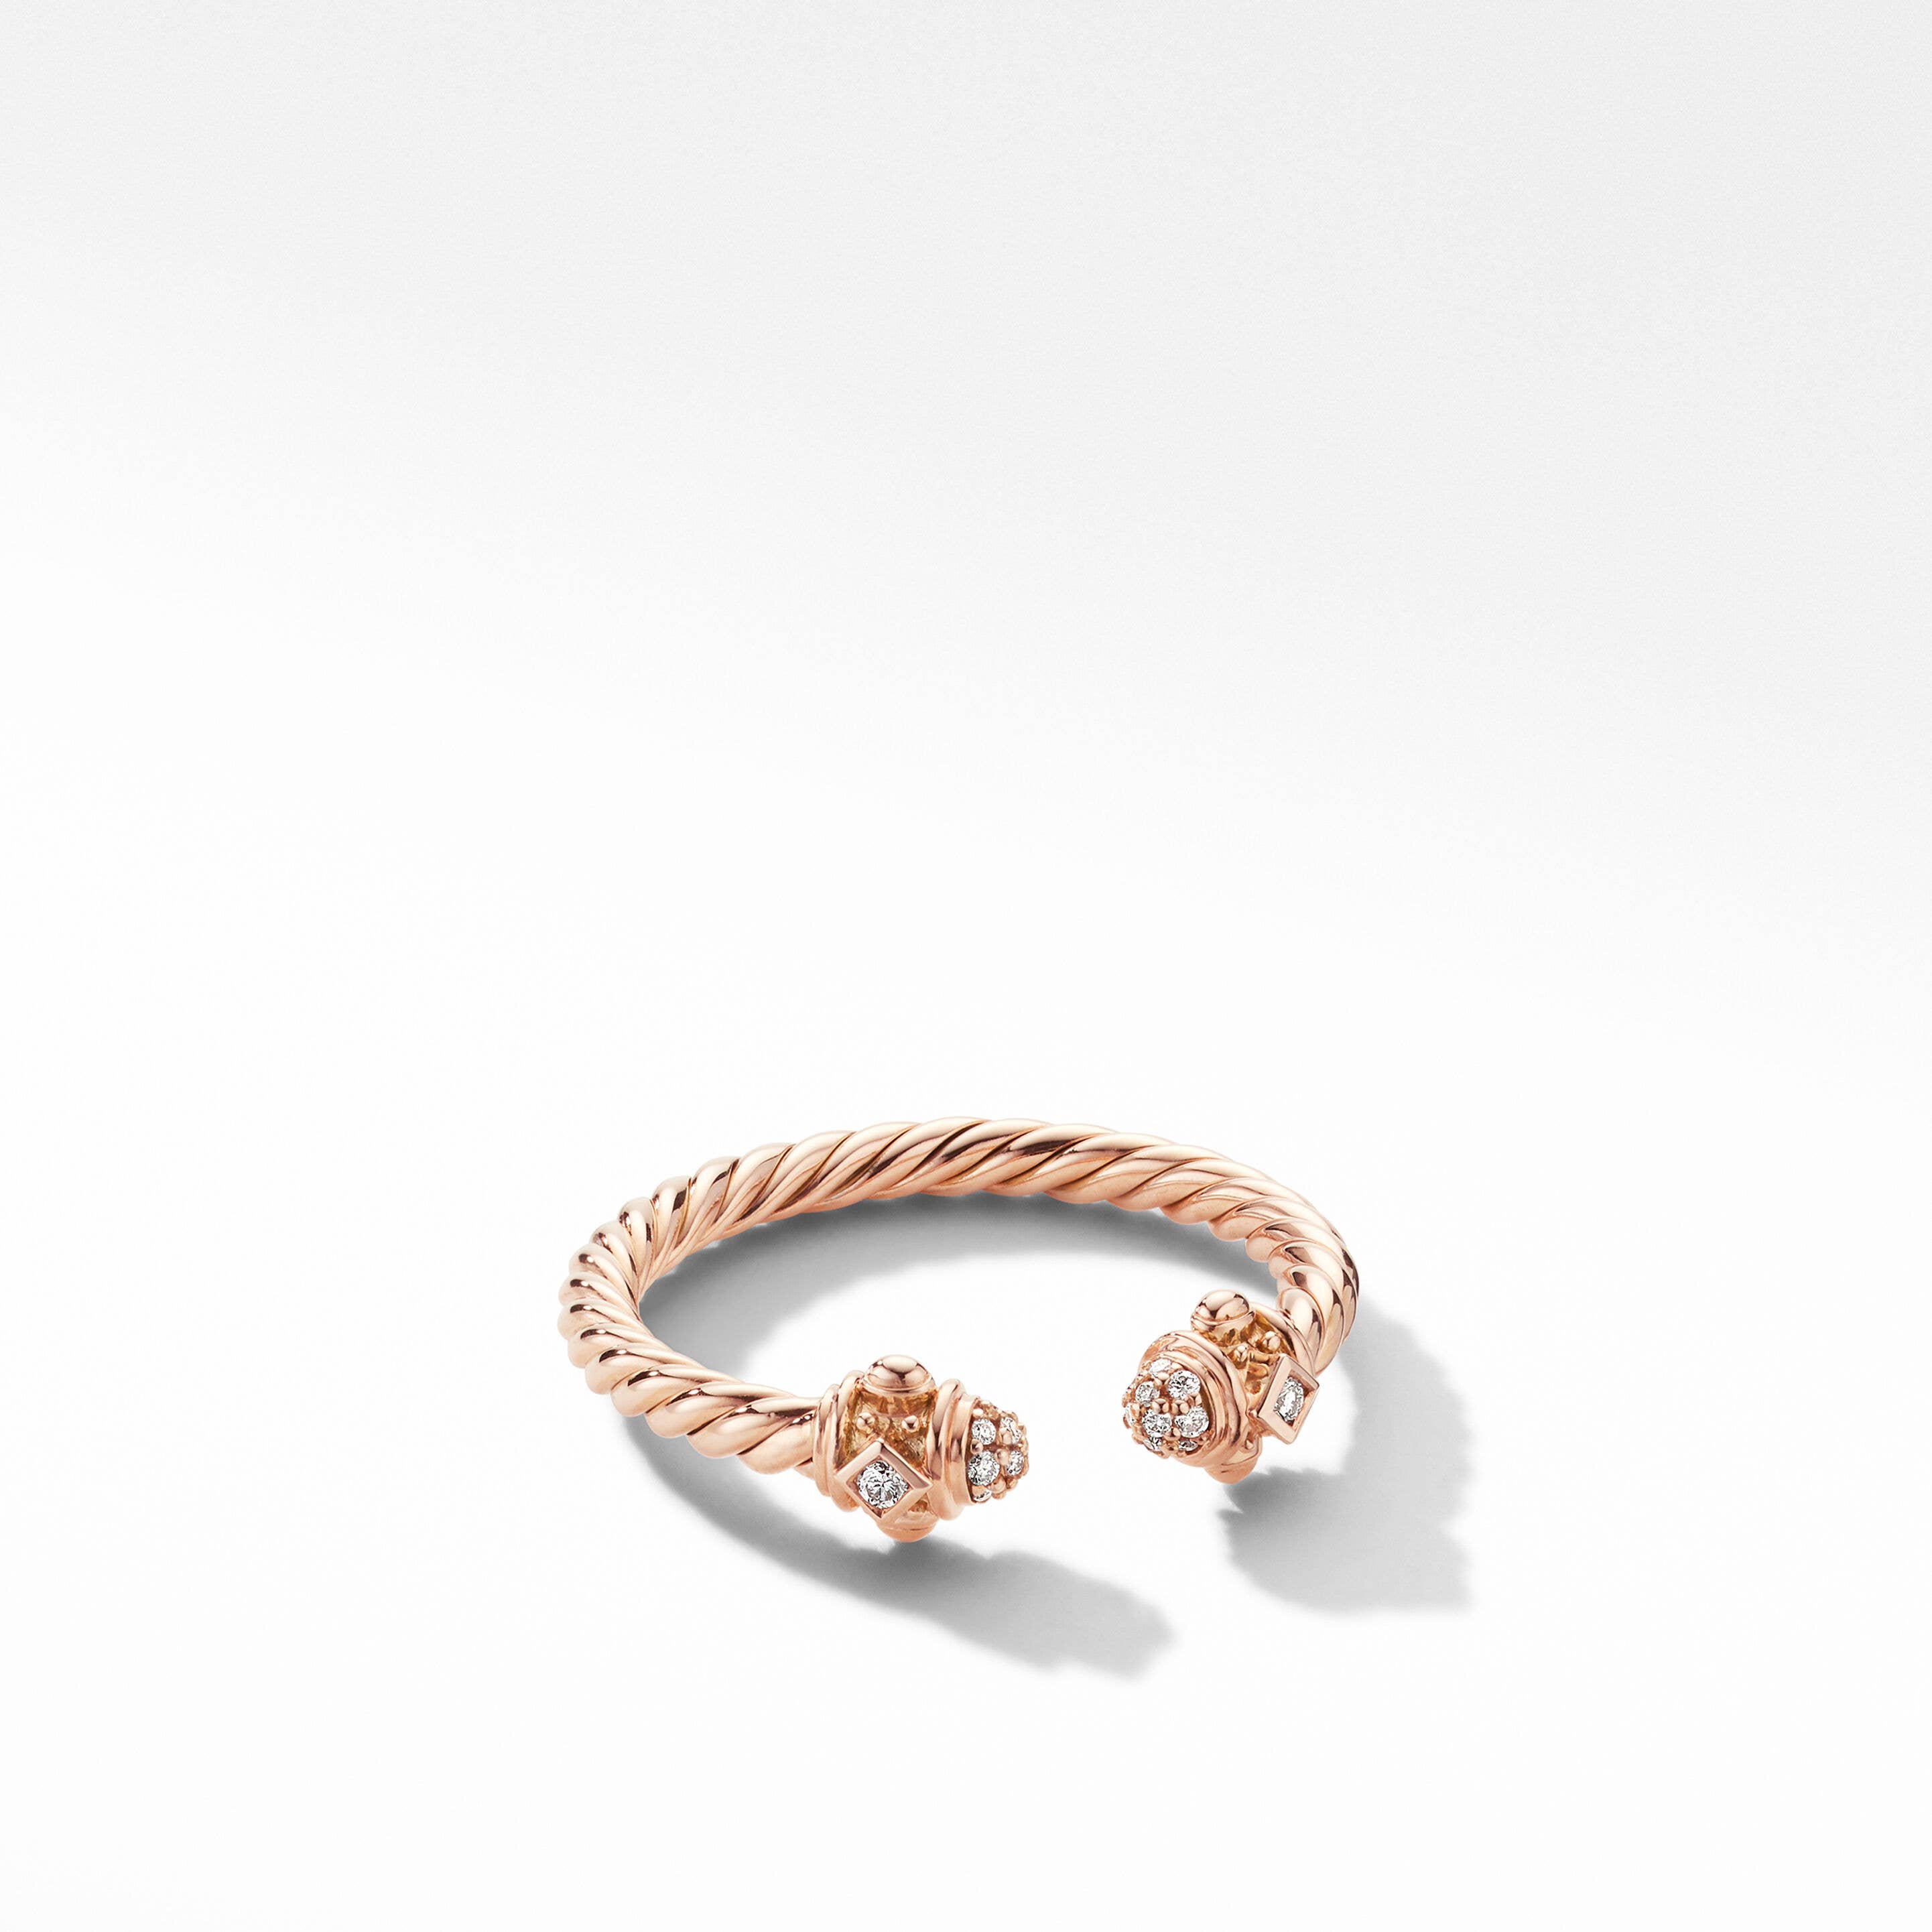 Renaissance Ring in 18K Rose Gold with Pavé Diamonds